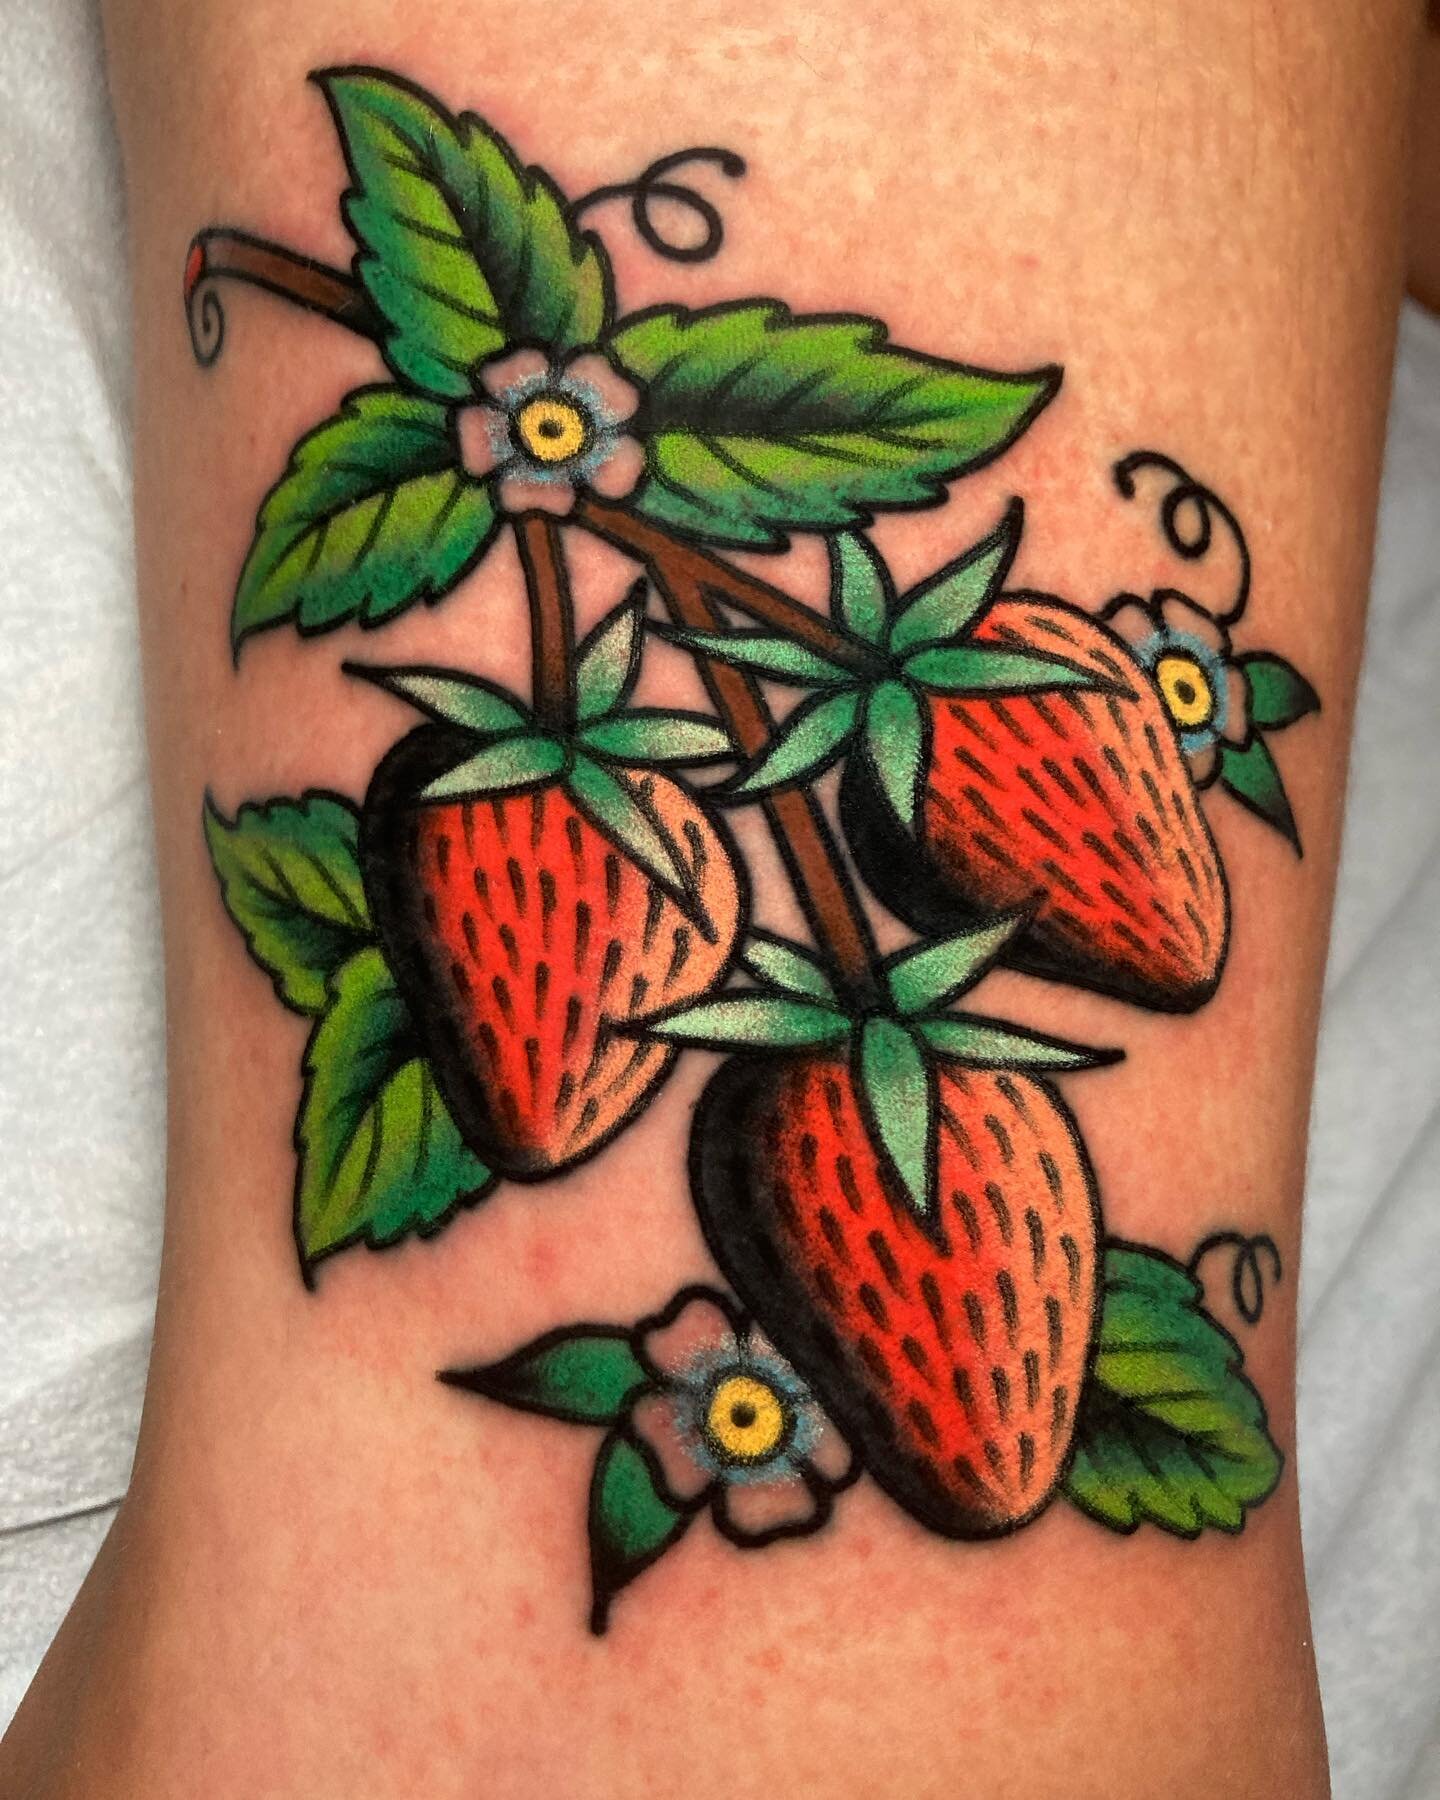 Strawbees on the one and only 
@amii.j @hotlinetattoo 

**************************************
To get on my waitlist, click the link in my Bio. If you're looking for something small, or a walk-in tattoo, feel free to call the shop at
508-827-7911 to 